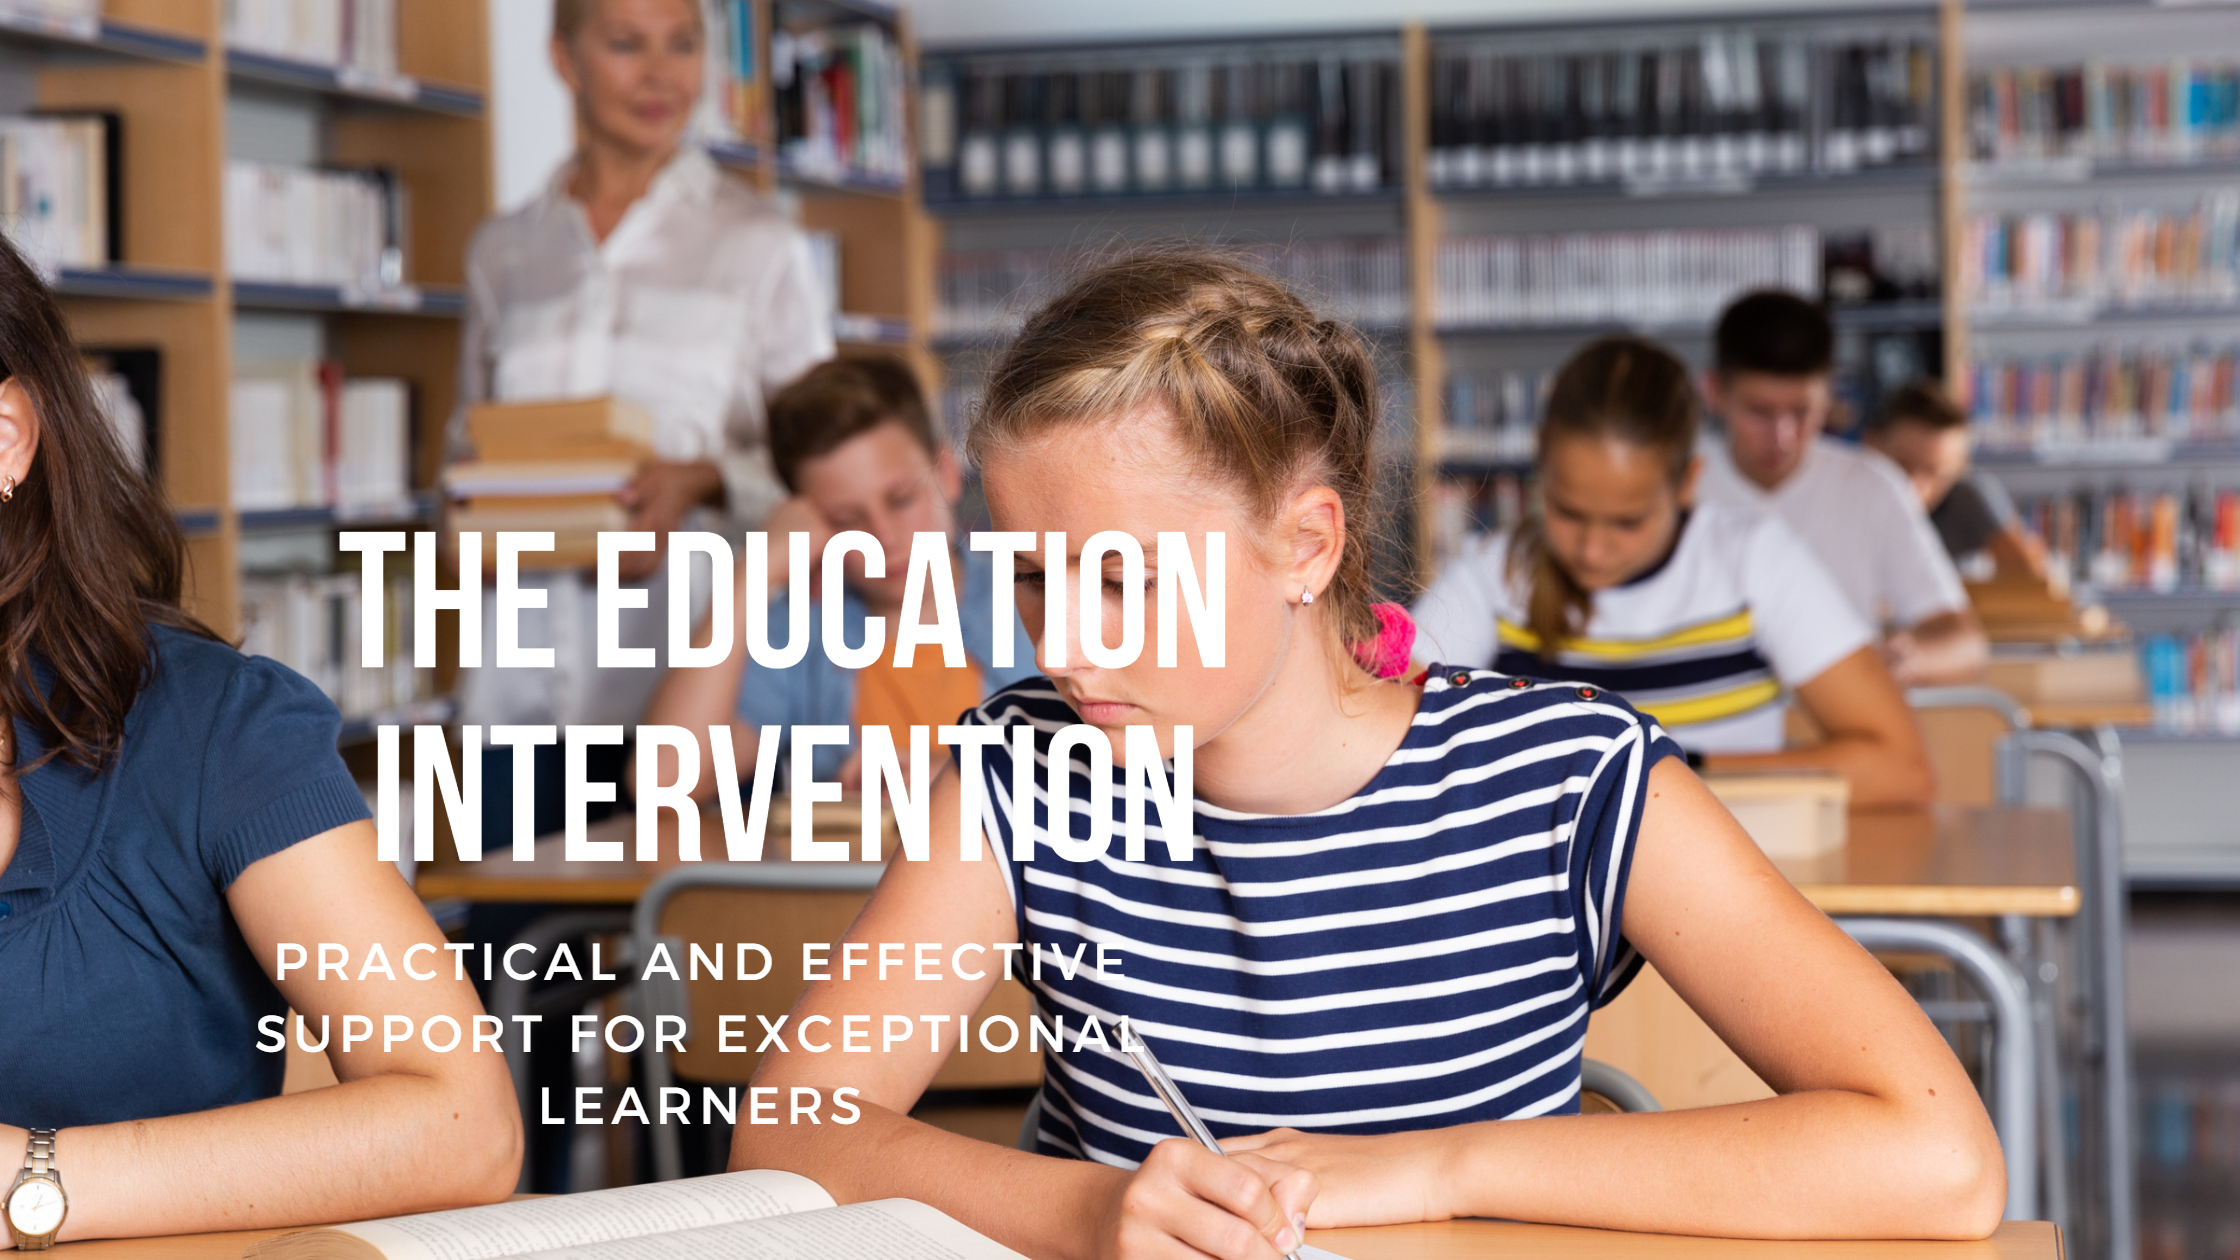 THE EDUCATION INTERVENTION